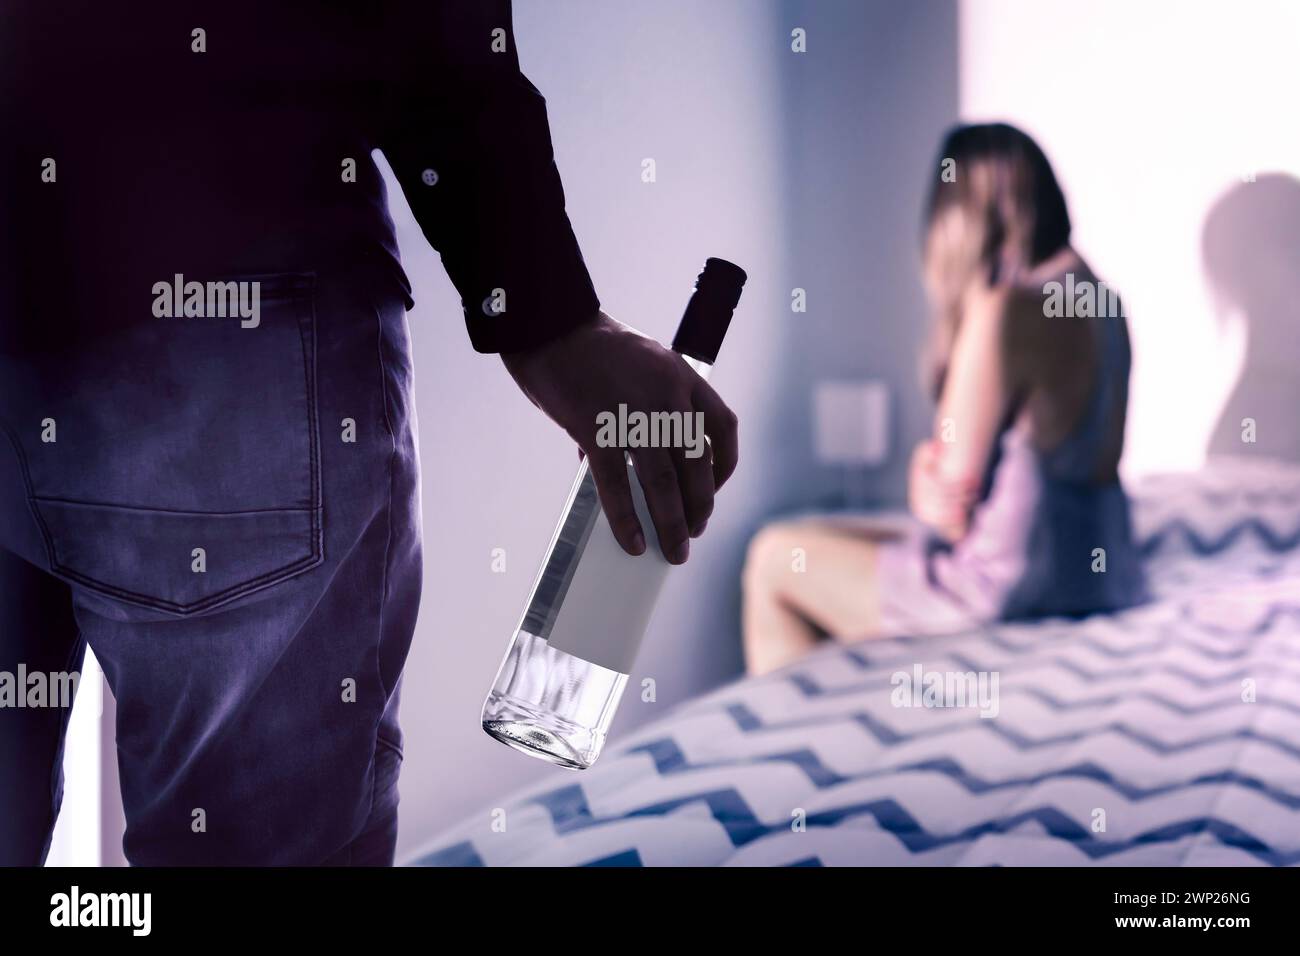 Alcohol and domestic violence. Drunk partner and husband with addiction. Wife in fear. Violent addict spouse. Couple fight. Problem in family home. Stock Photo